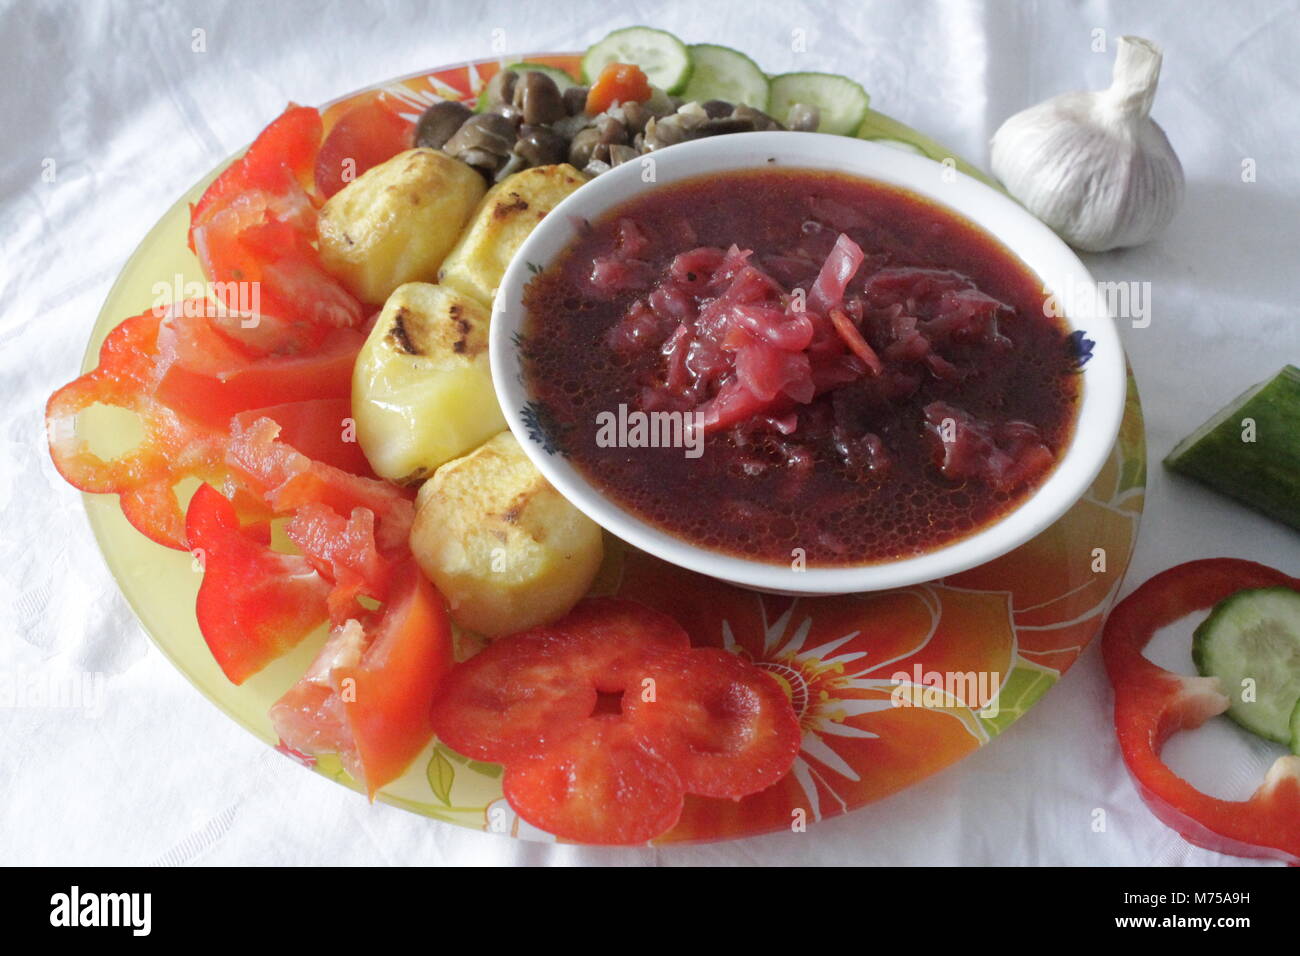 appetizing fresh vegetarian dinner soup from beet, roasted potato with mushrooms, ripe juicy tomato, cucumber and pepper prepare for meal Stock Photo